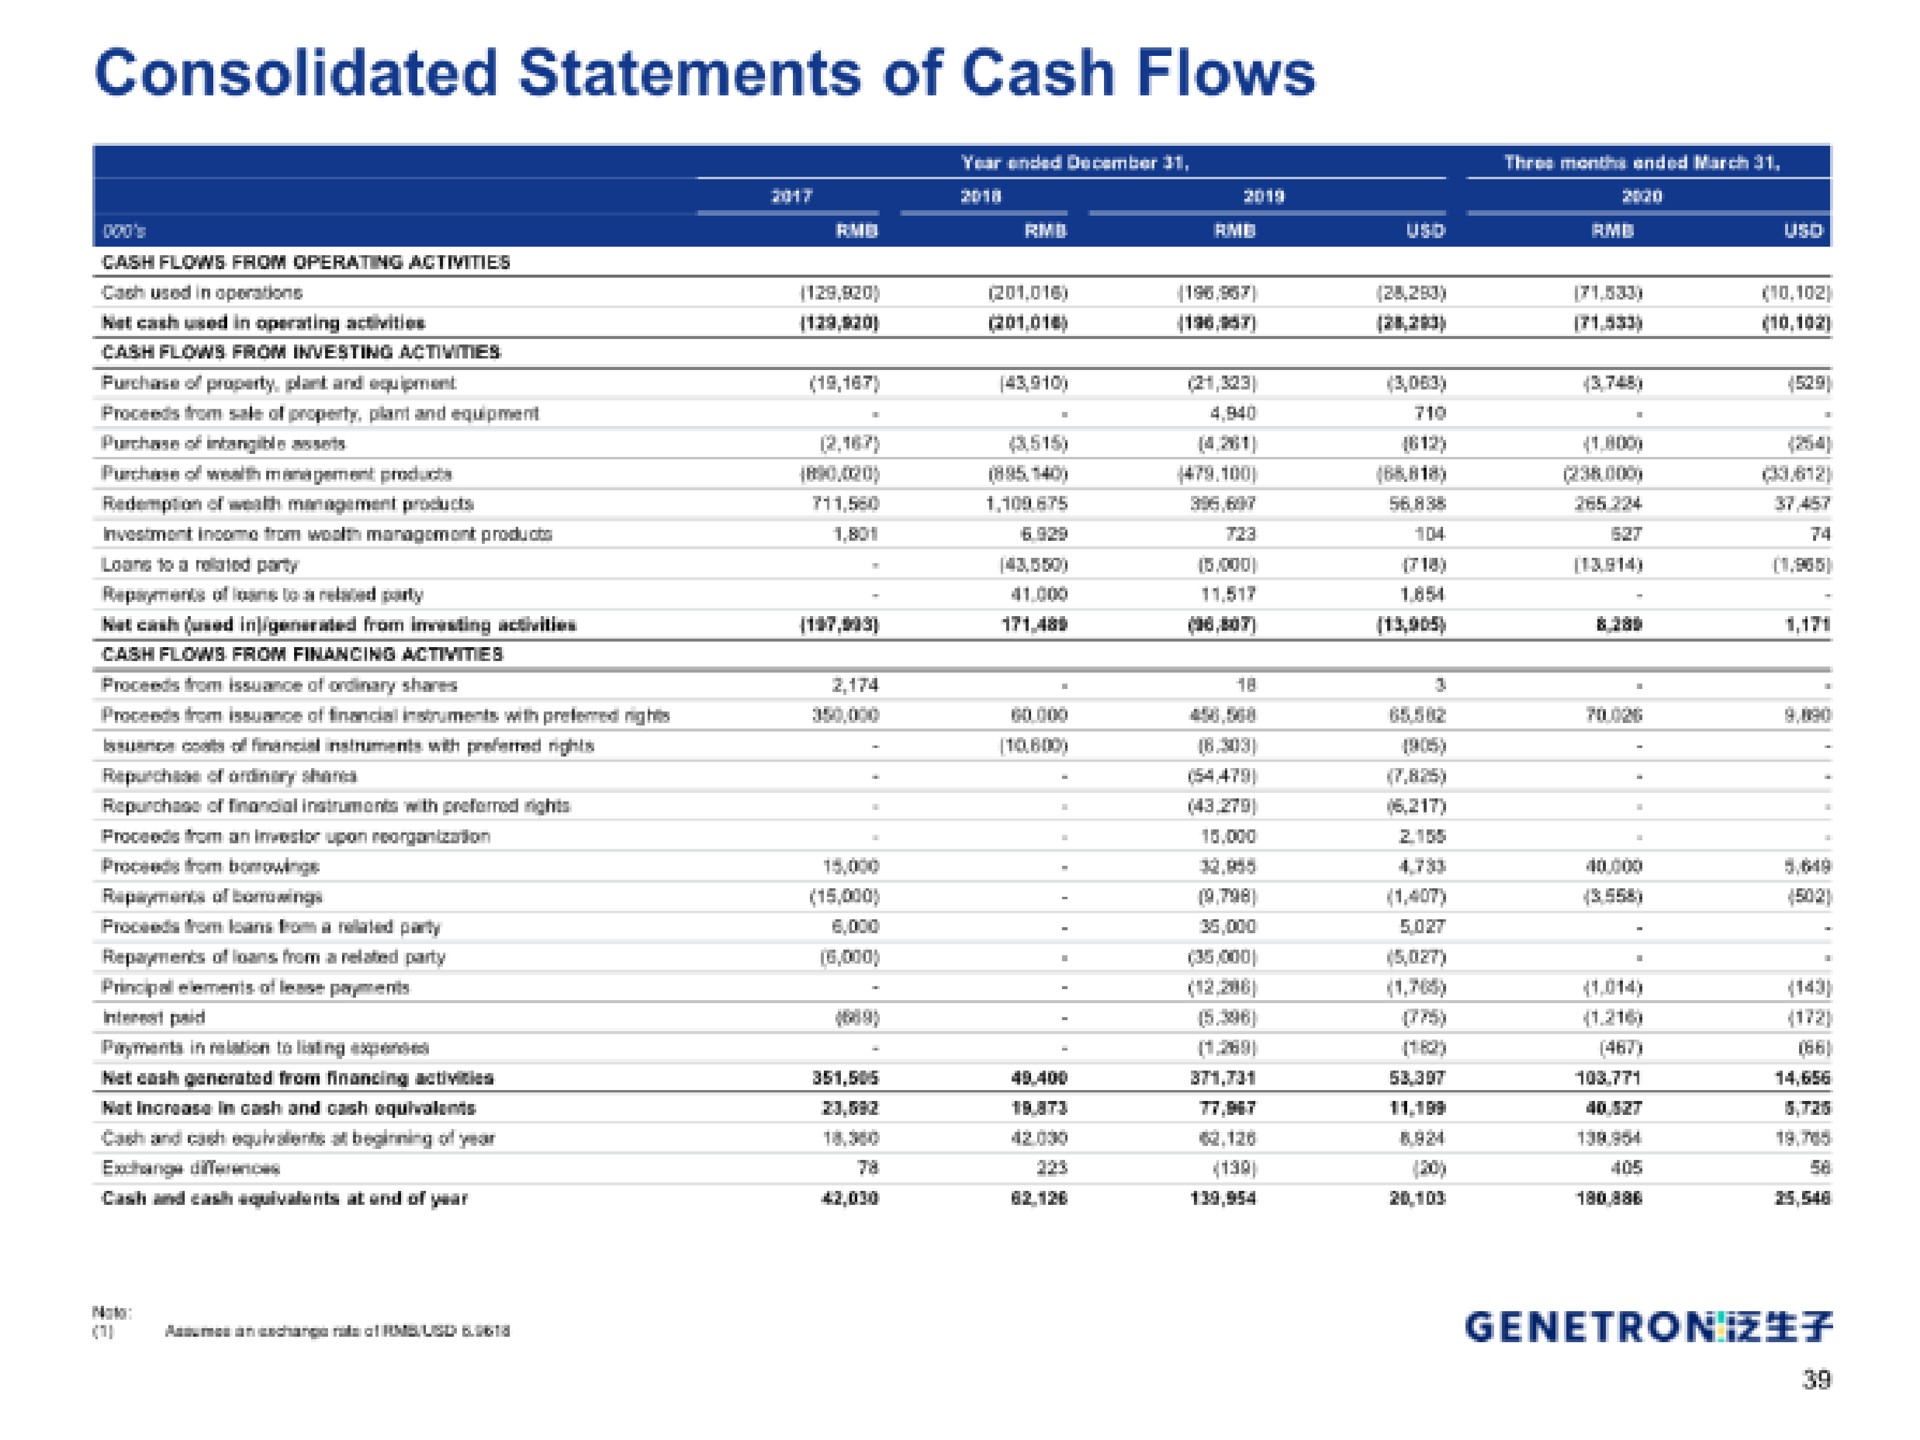 consolidated statements of cash flows | Genetron